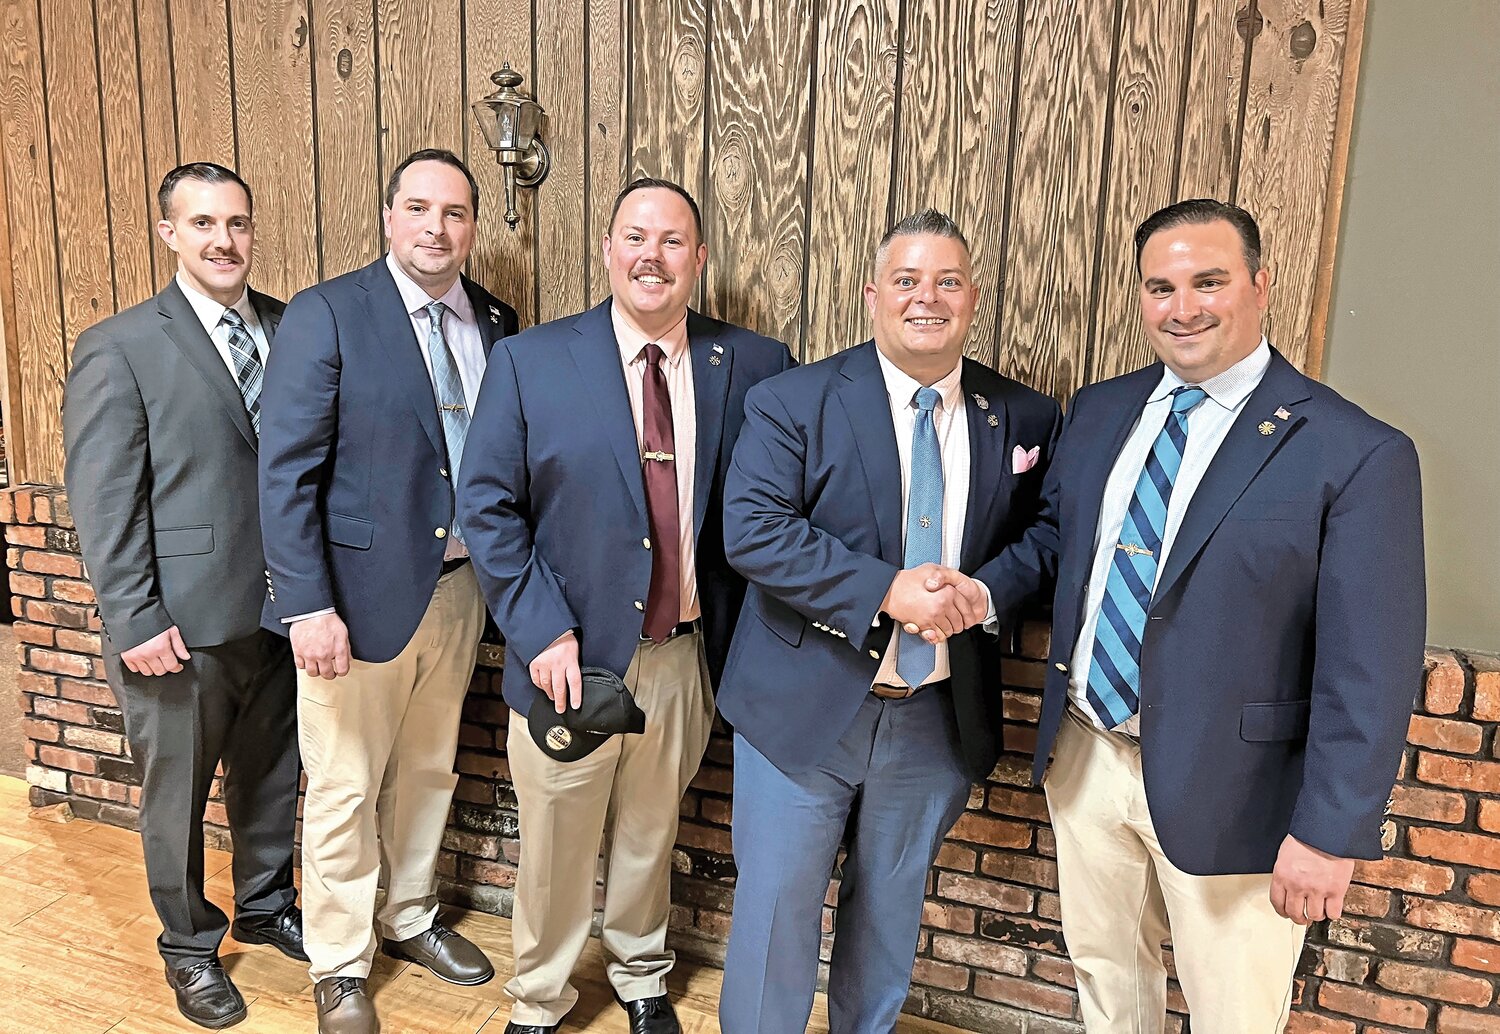 Incoming Lynbrook fire chiefs were elected April 6.